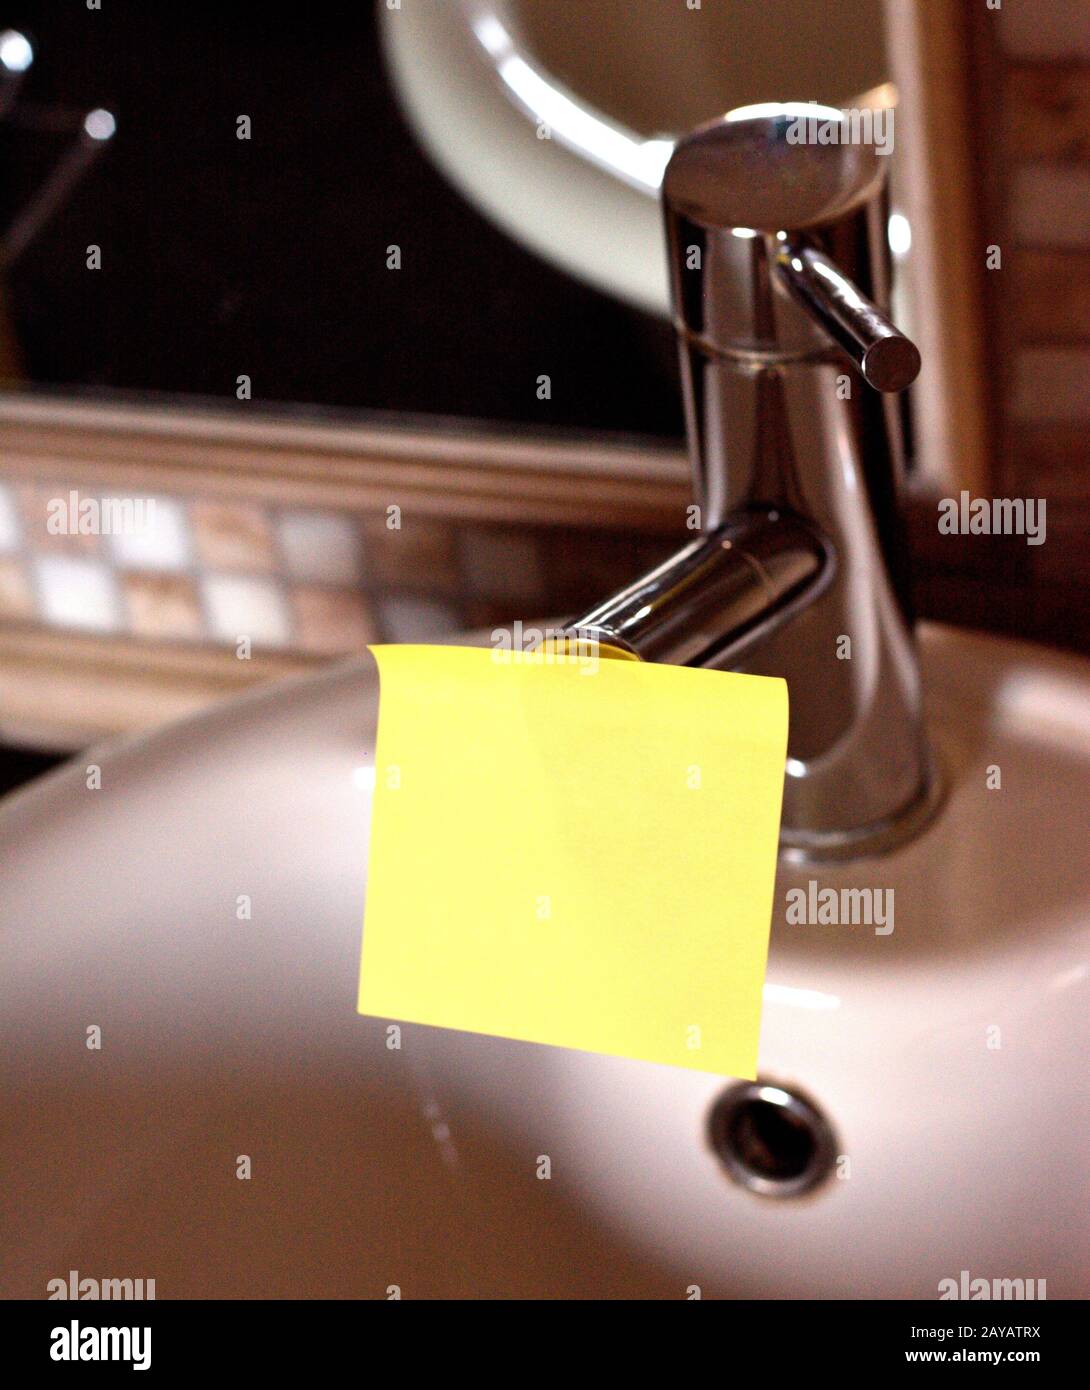 Rectangular Yellow Note Paper Attached On Toilet Sink Faucet Piece Of Square Sheet Use To Give Notation Stick To Water Tap In T Stock Photo Alamy